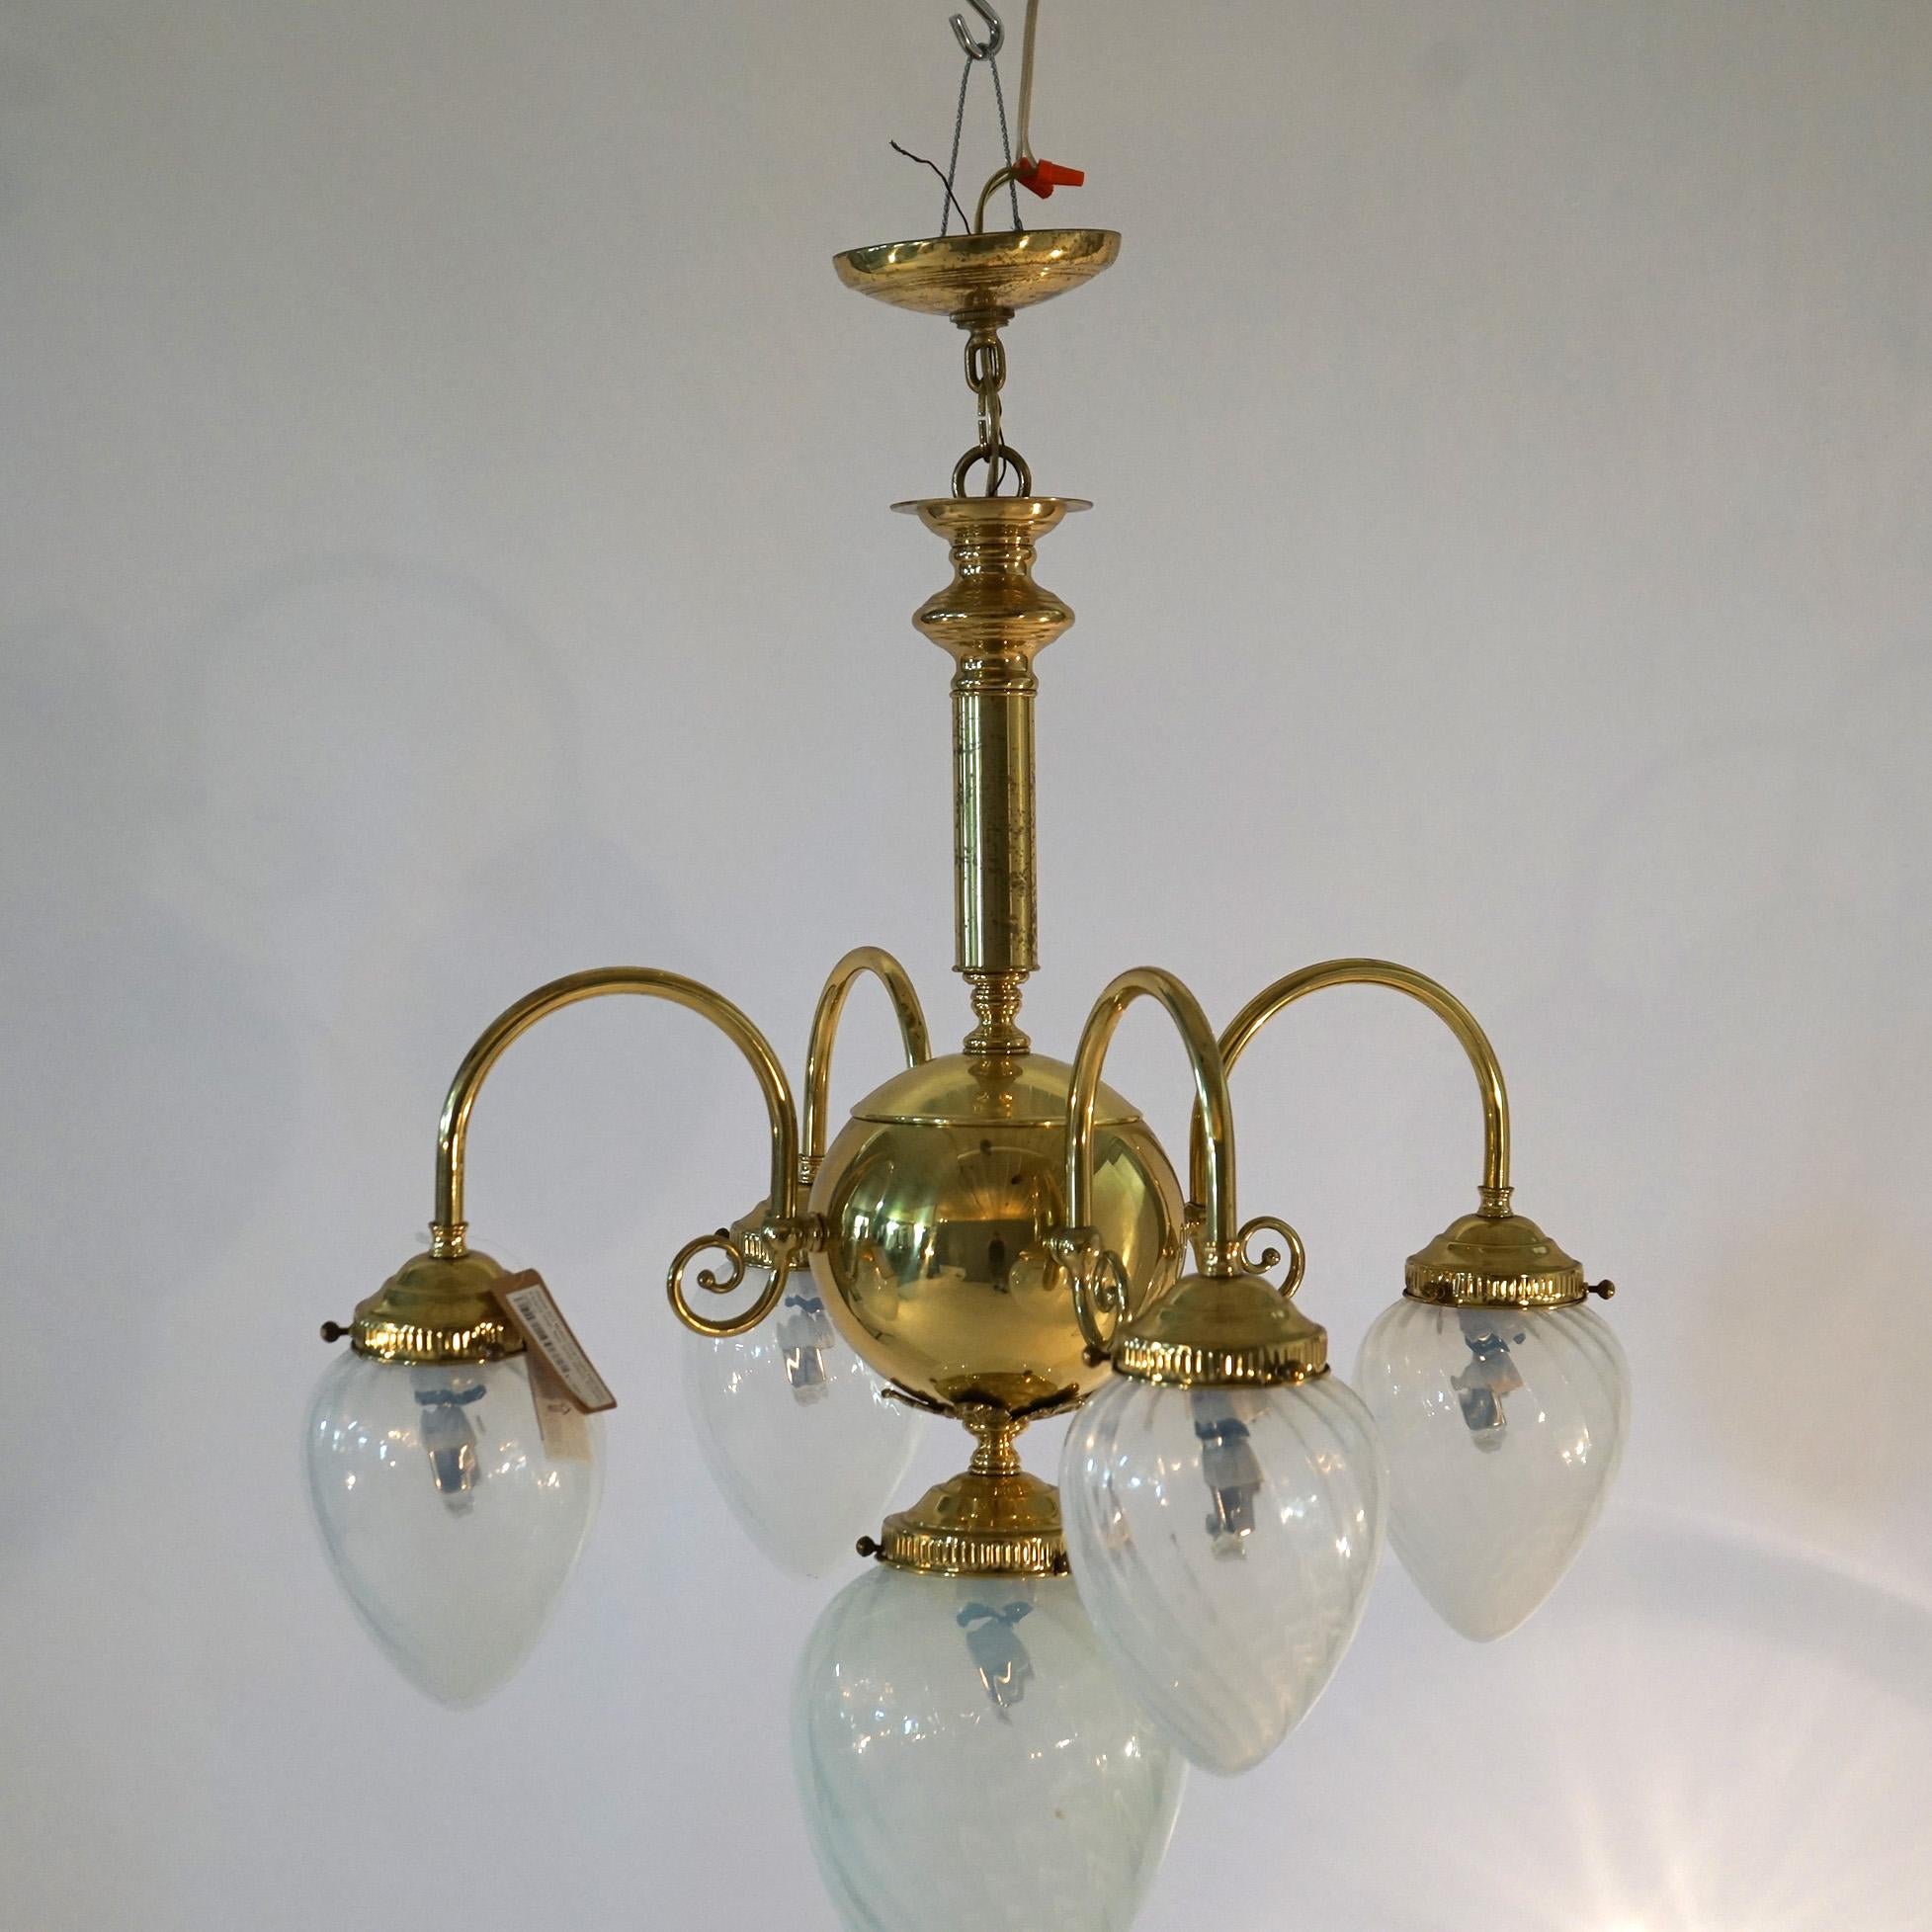 Brass Five-Light Hanging Fixture with Tear Drop Swirl Glass Shades 20th C For Sale 2